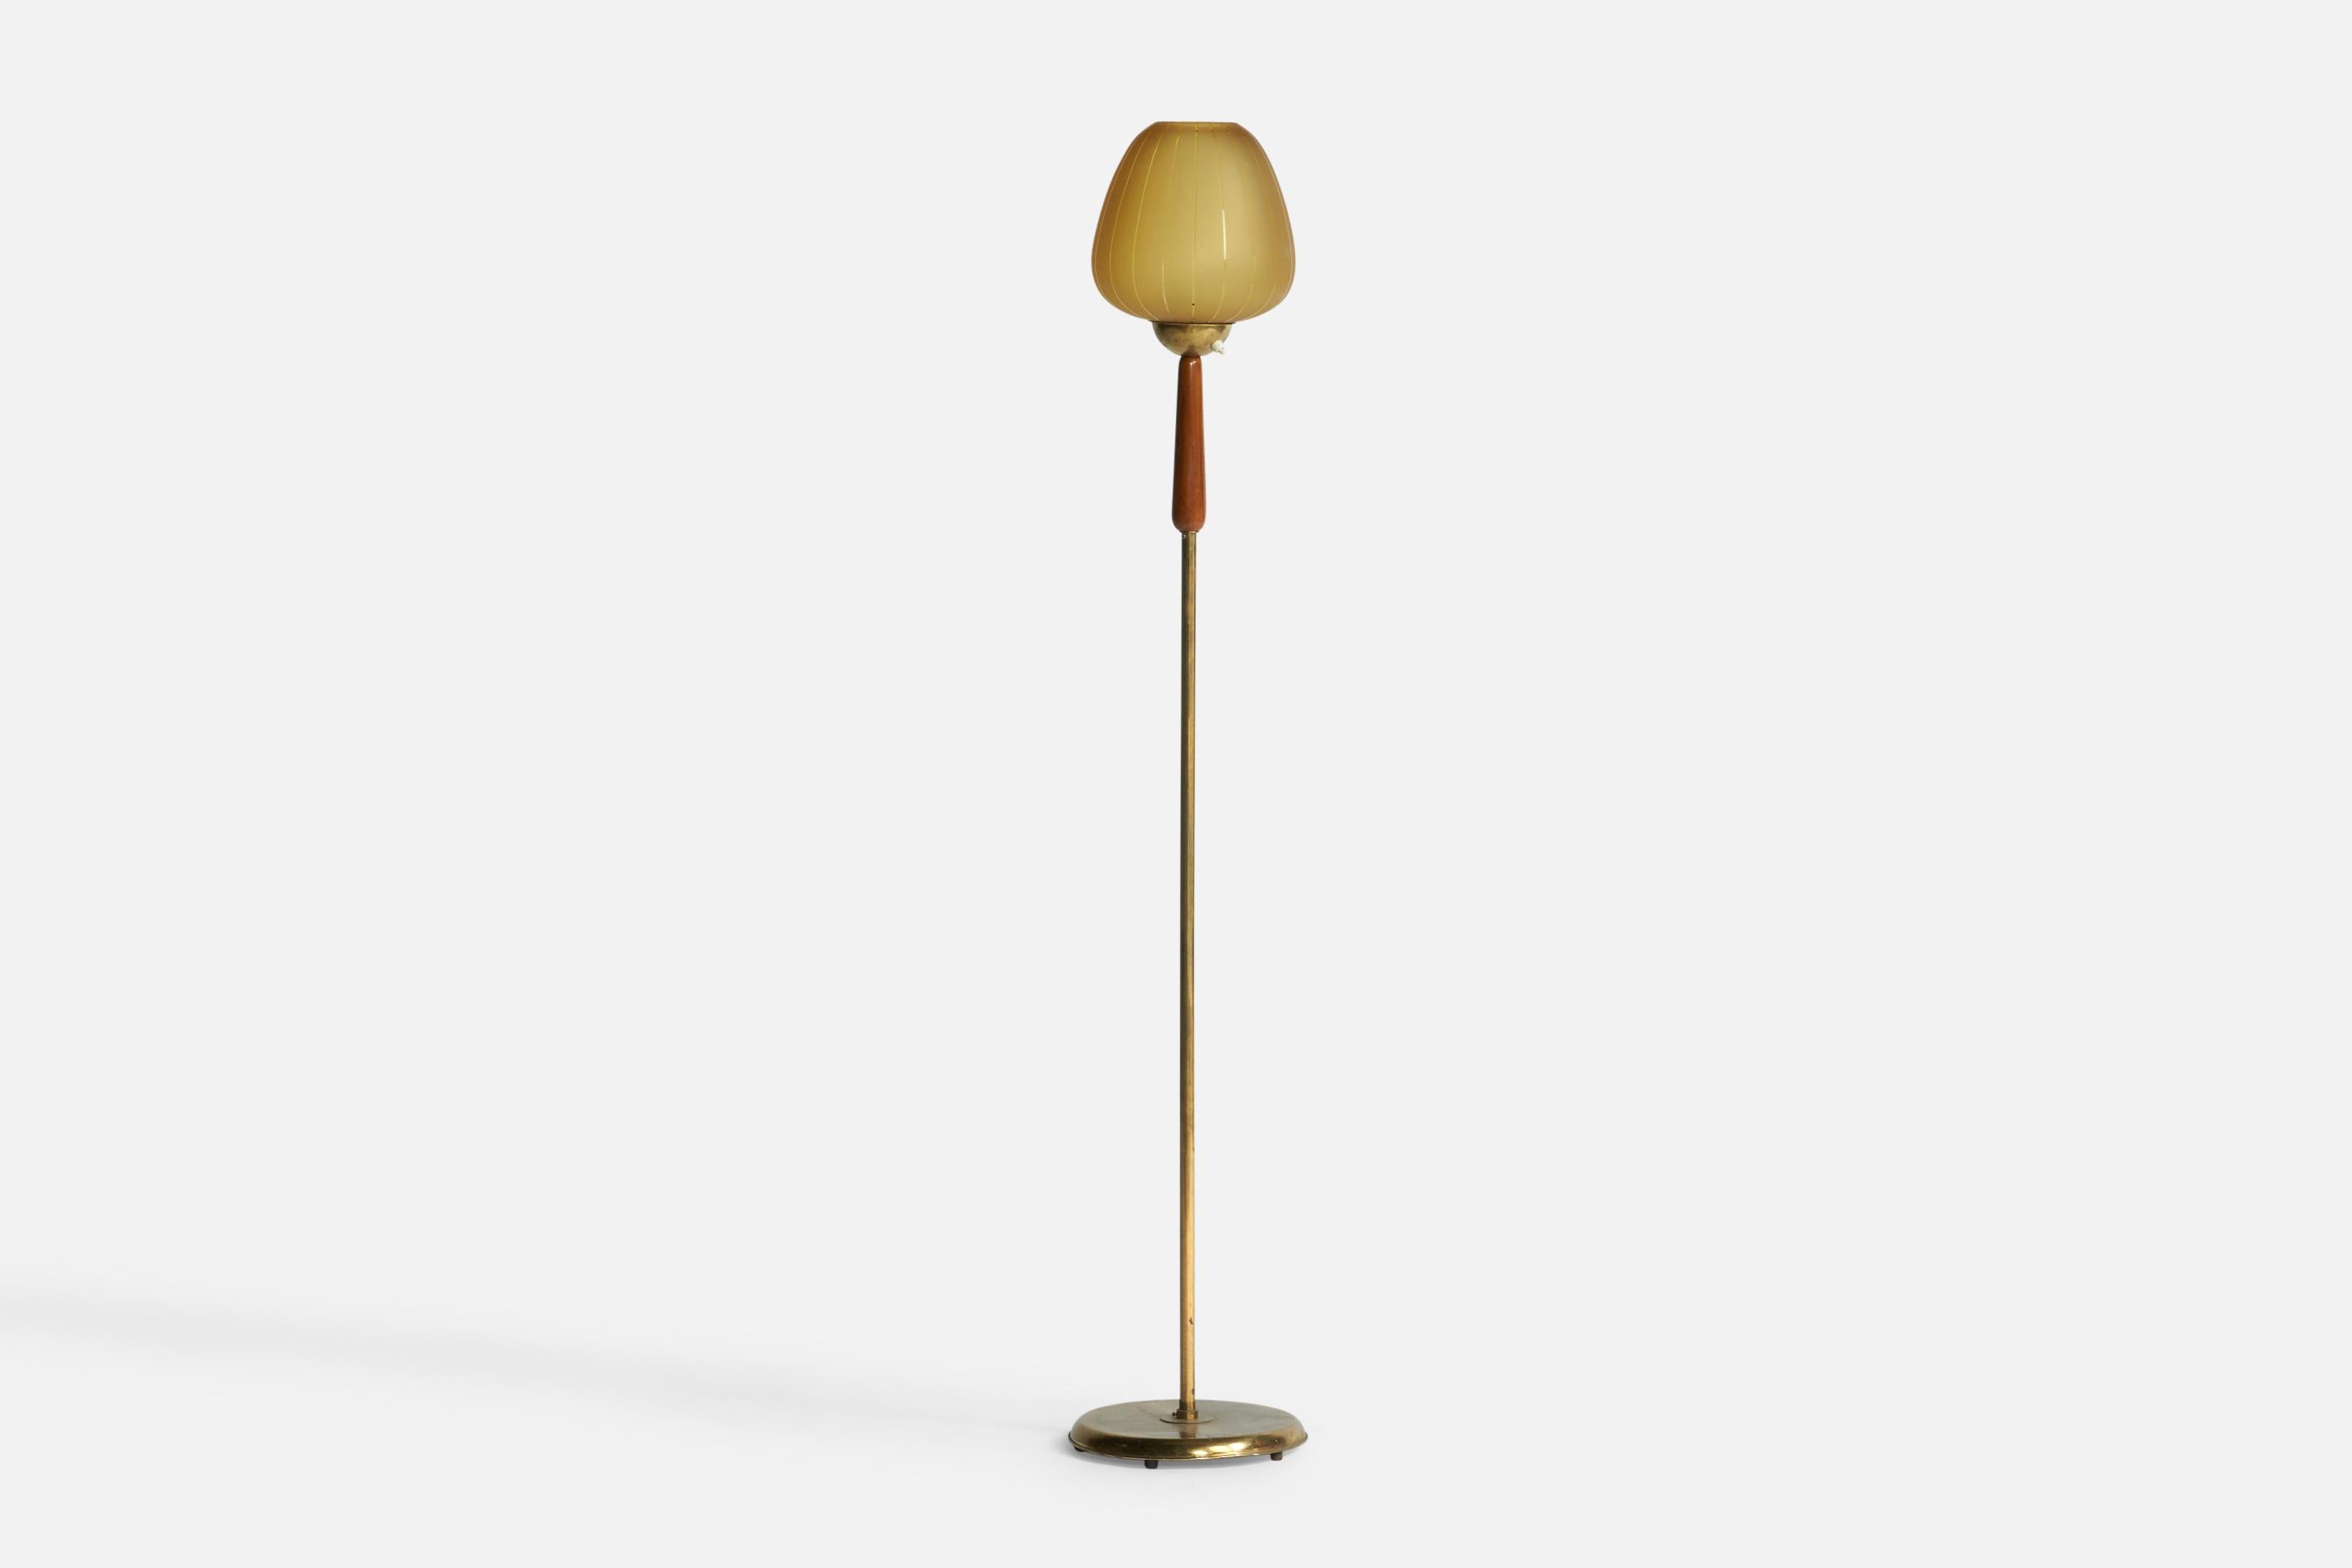 A brass, teak and etched beige-coloured glass floor lamp designed and produced in Sweden, c. 1950s.

Overall Dimensions (inches): 59.5” H x 11” W x 11” D. Base has 11” diameter. Glass shade has 9” diameter.
Bulb Specifications: E-26 Bulb
Number of